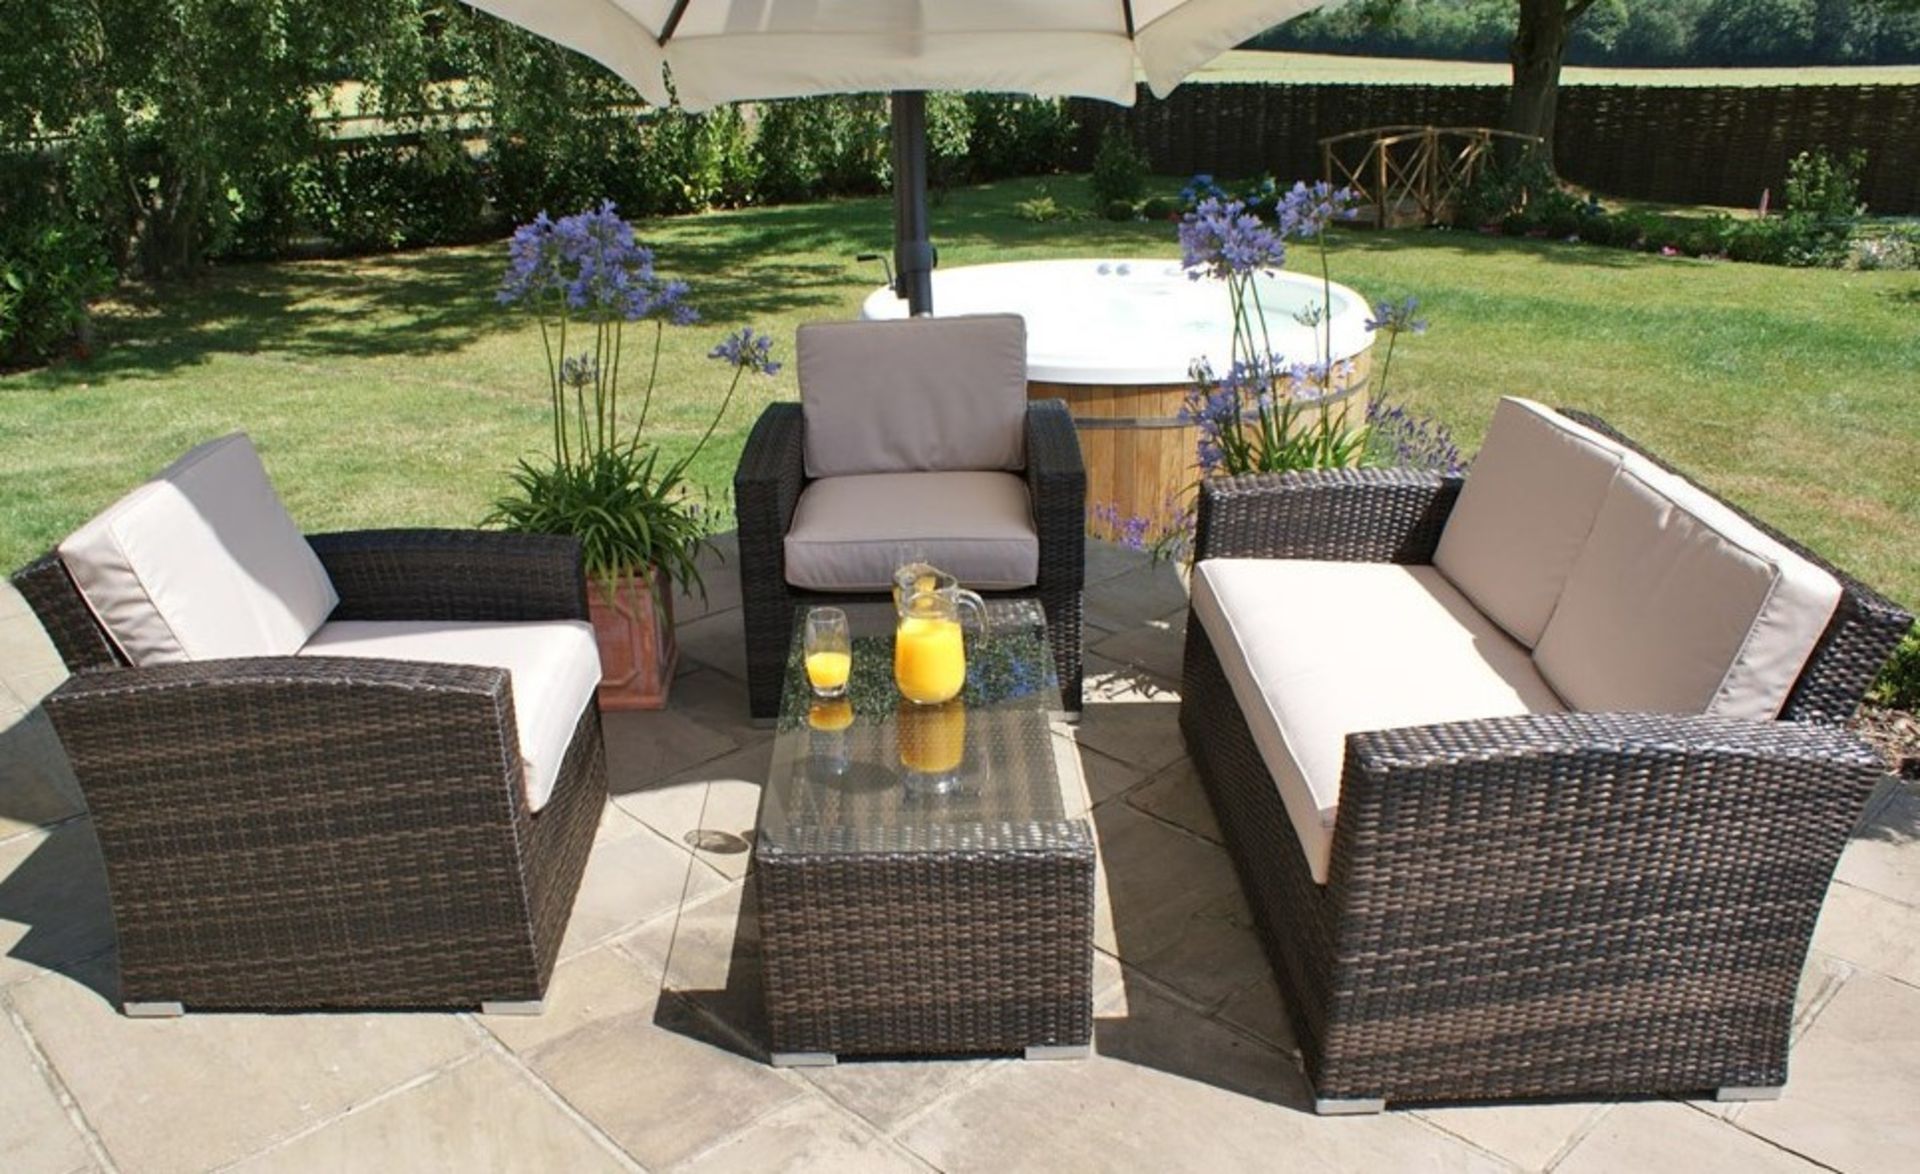 + VAT Brand New Chelsea Garden Company Four Piece Grey Rattan Outdoor Sofa Set - Includes Two - Image 2 of 2